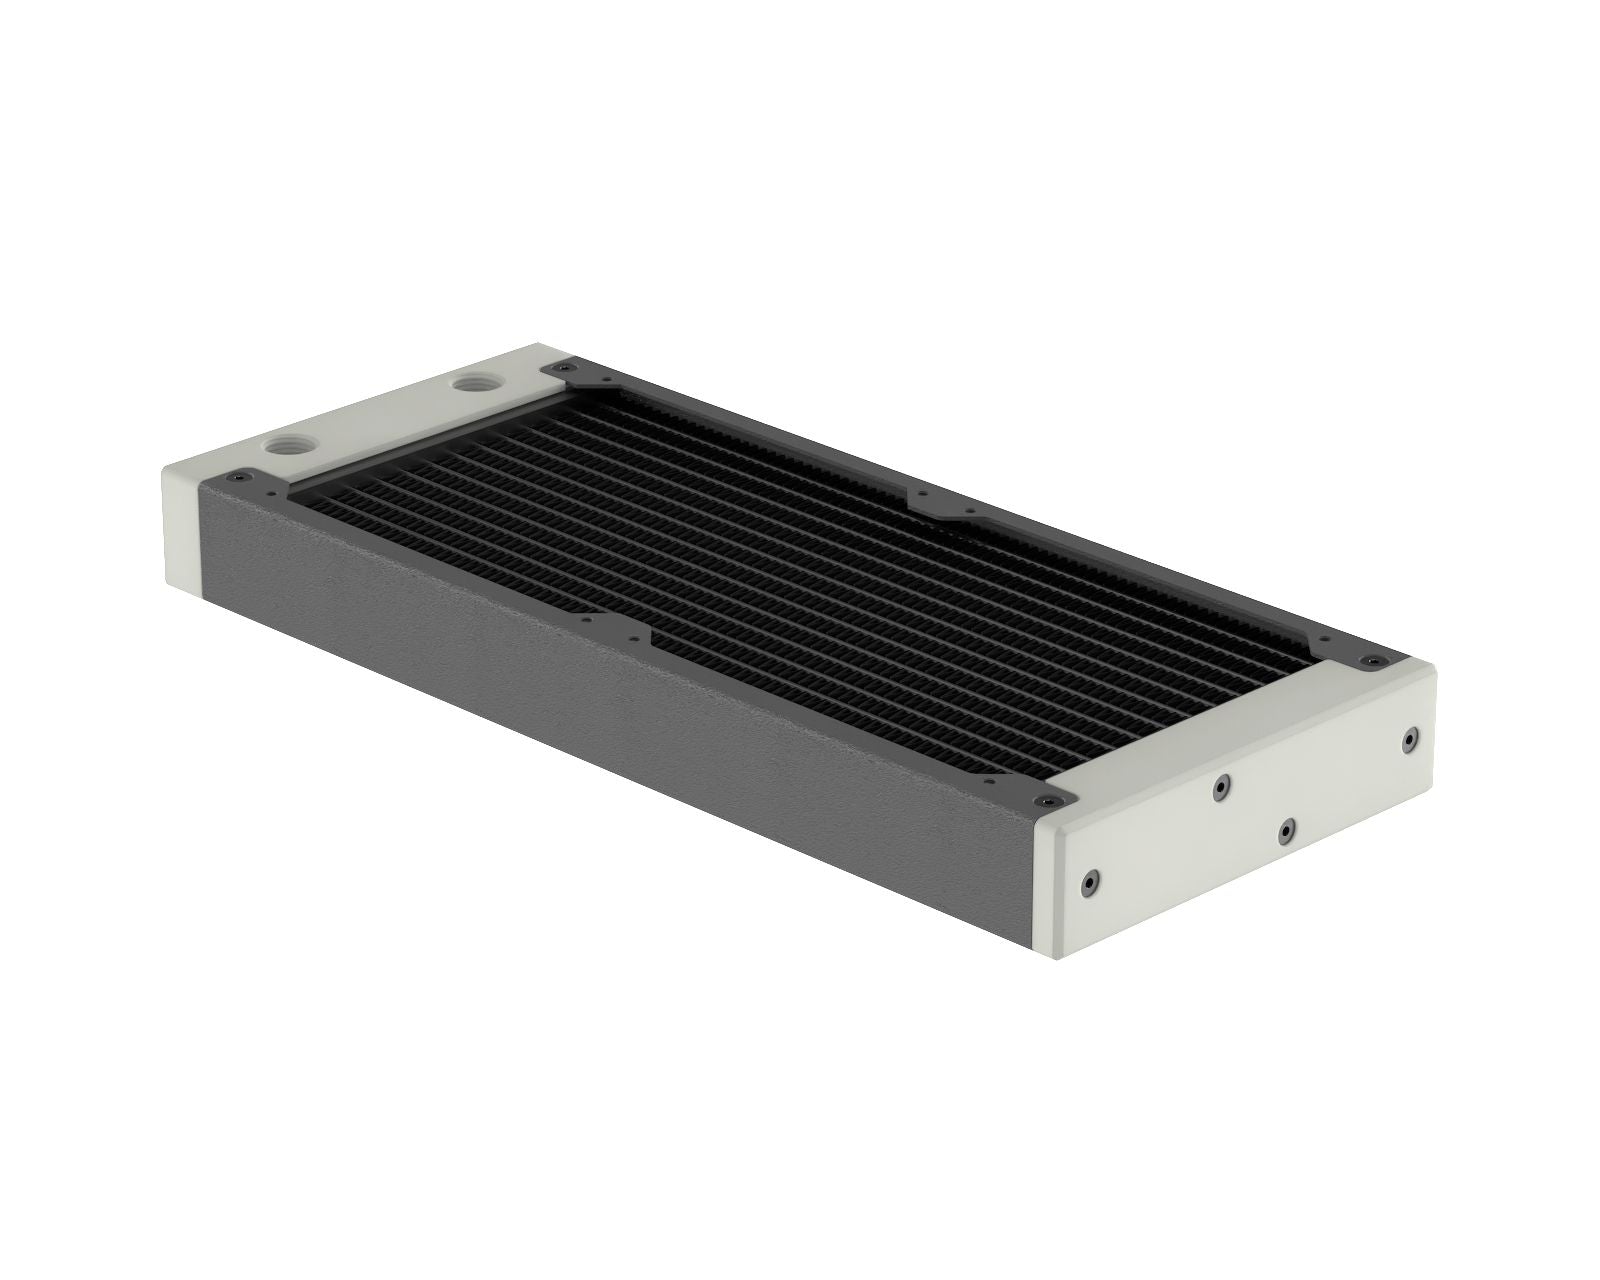 PrimoChill 240SL (30mm) EXIMO Modular Radiator, White POM, 2x120mm, Dual Fan (R-SL-W24) Available in 20+ Colors, Assembled in USA and Custom Watercooling Loop Ready - TX Matte Gun Metal